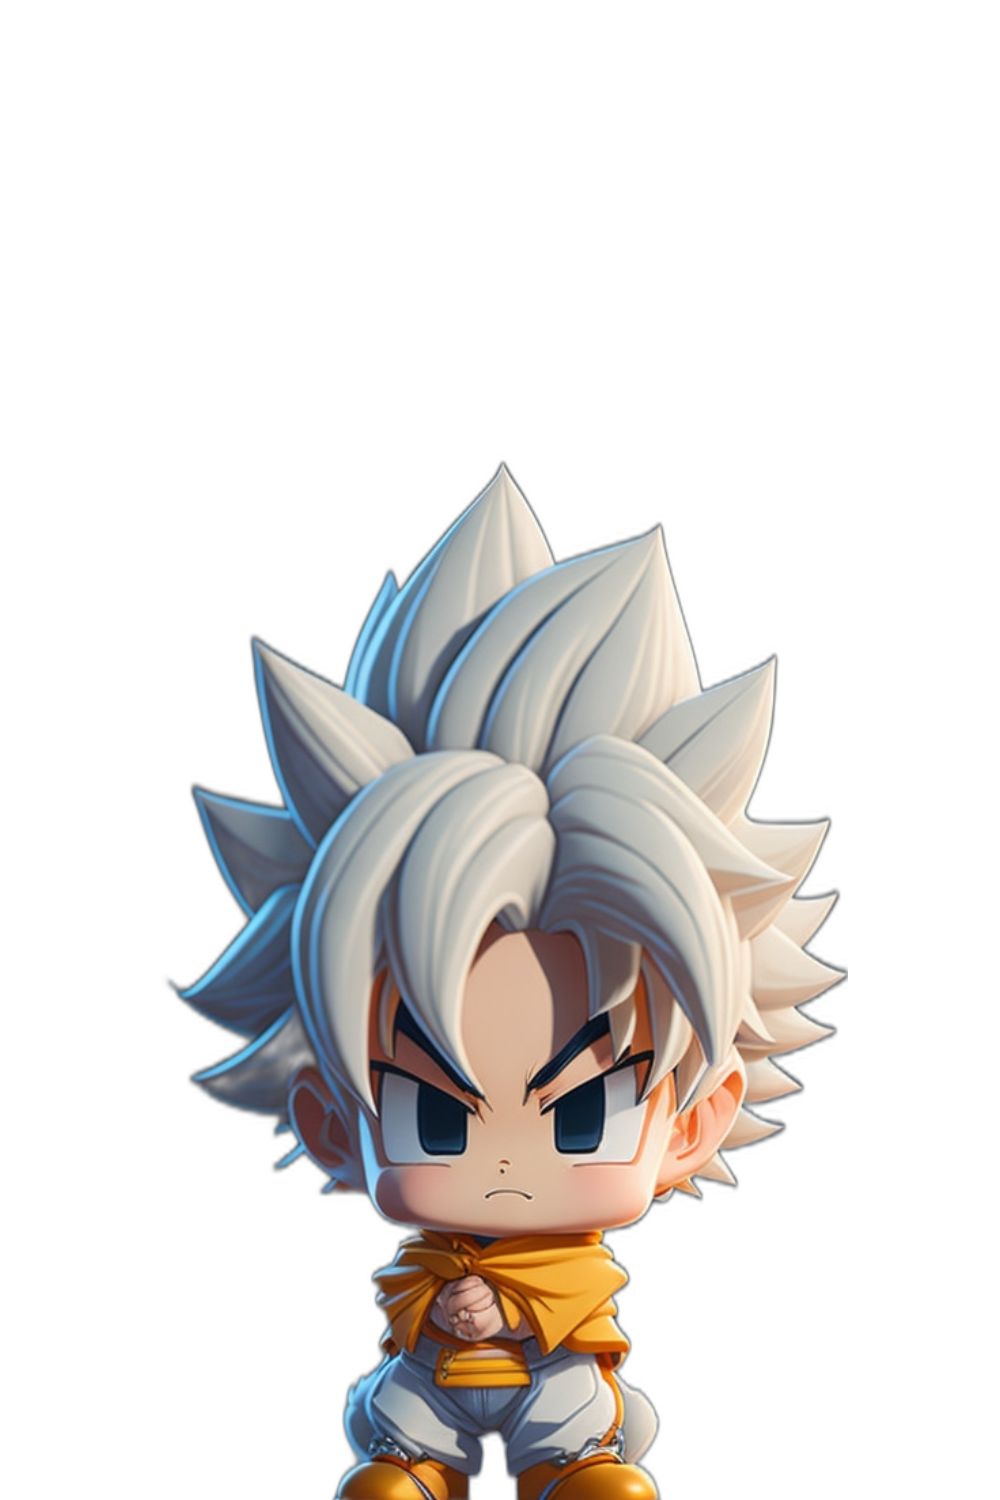 3D Animated style Goku design high quality pinterest preview image.